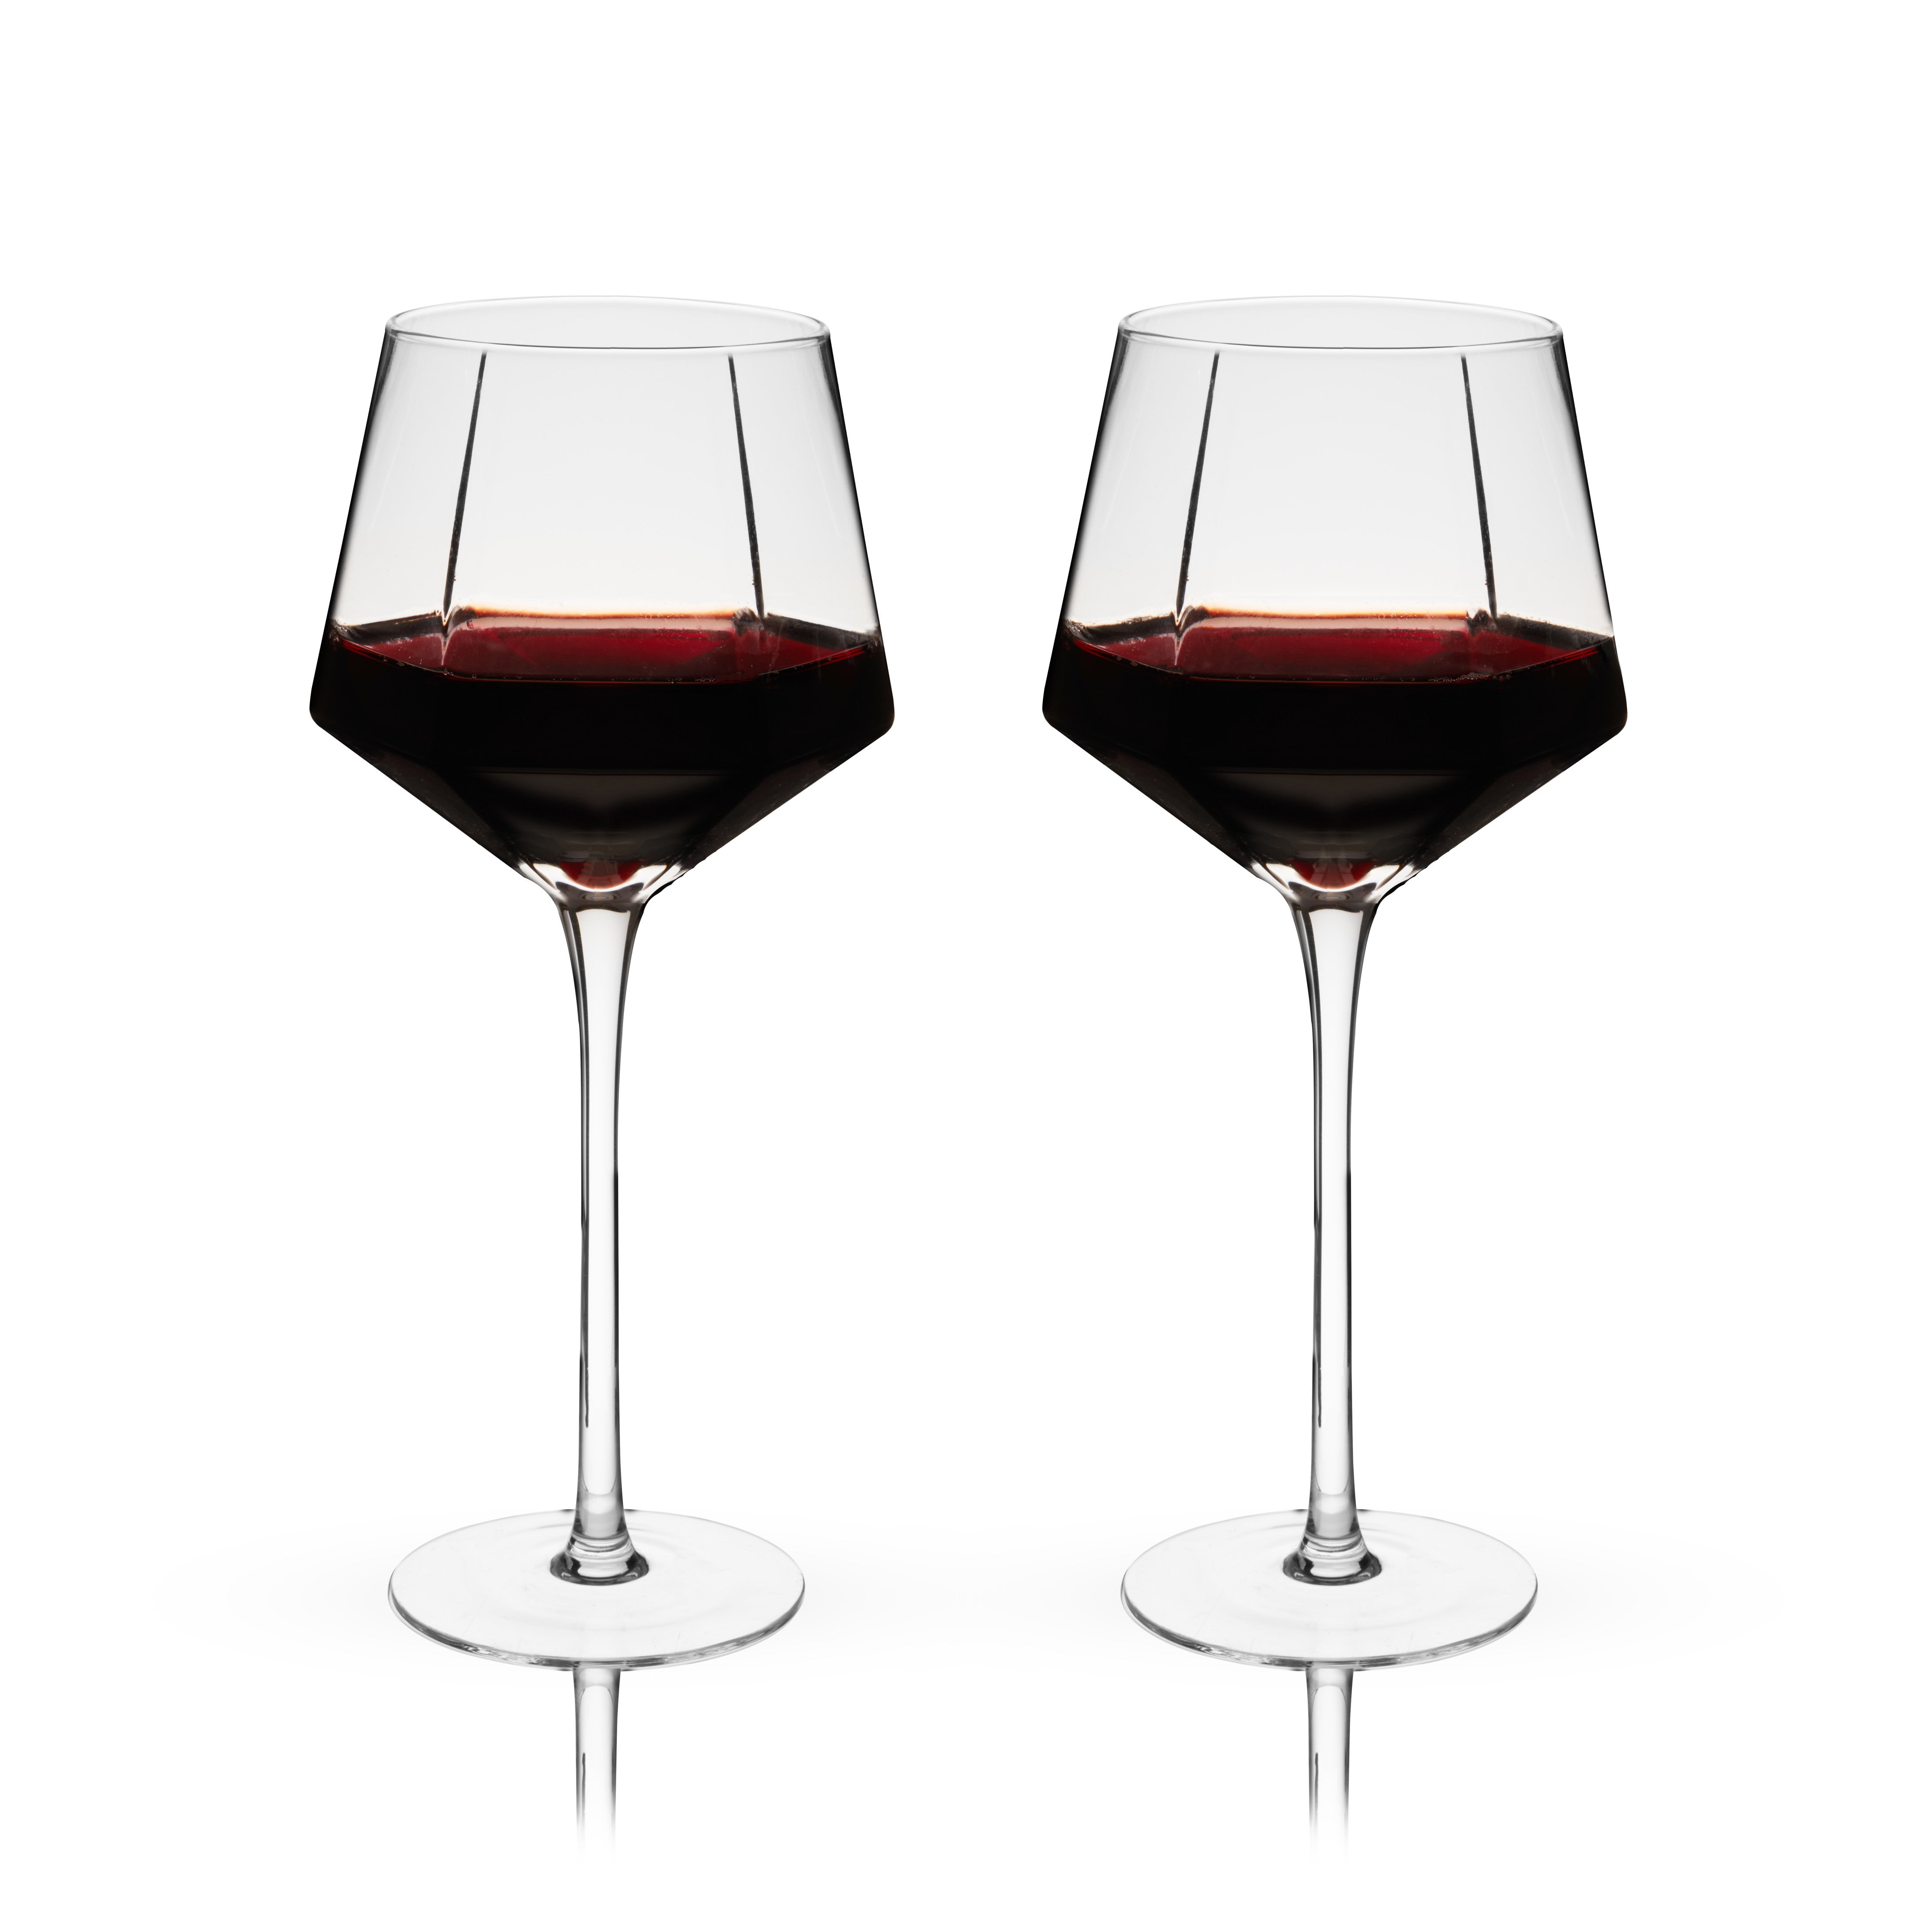 Modern Curved Stem Slanted Clear Red Wine Glass - Buy Modern Curved Stem  Slanted Clear Red Wine Glass Product on